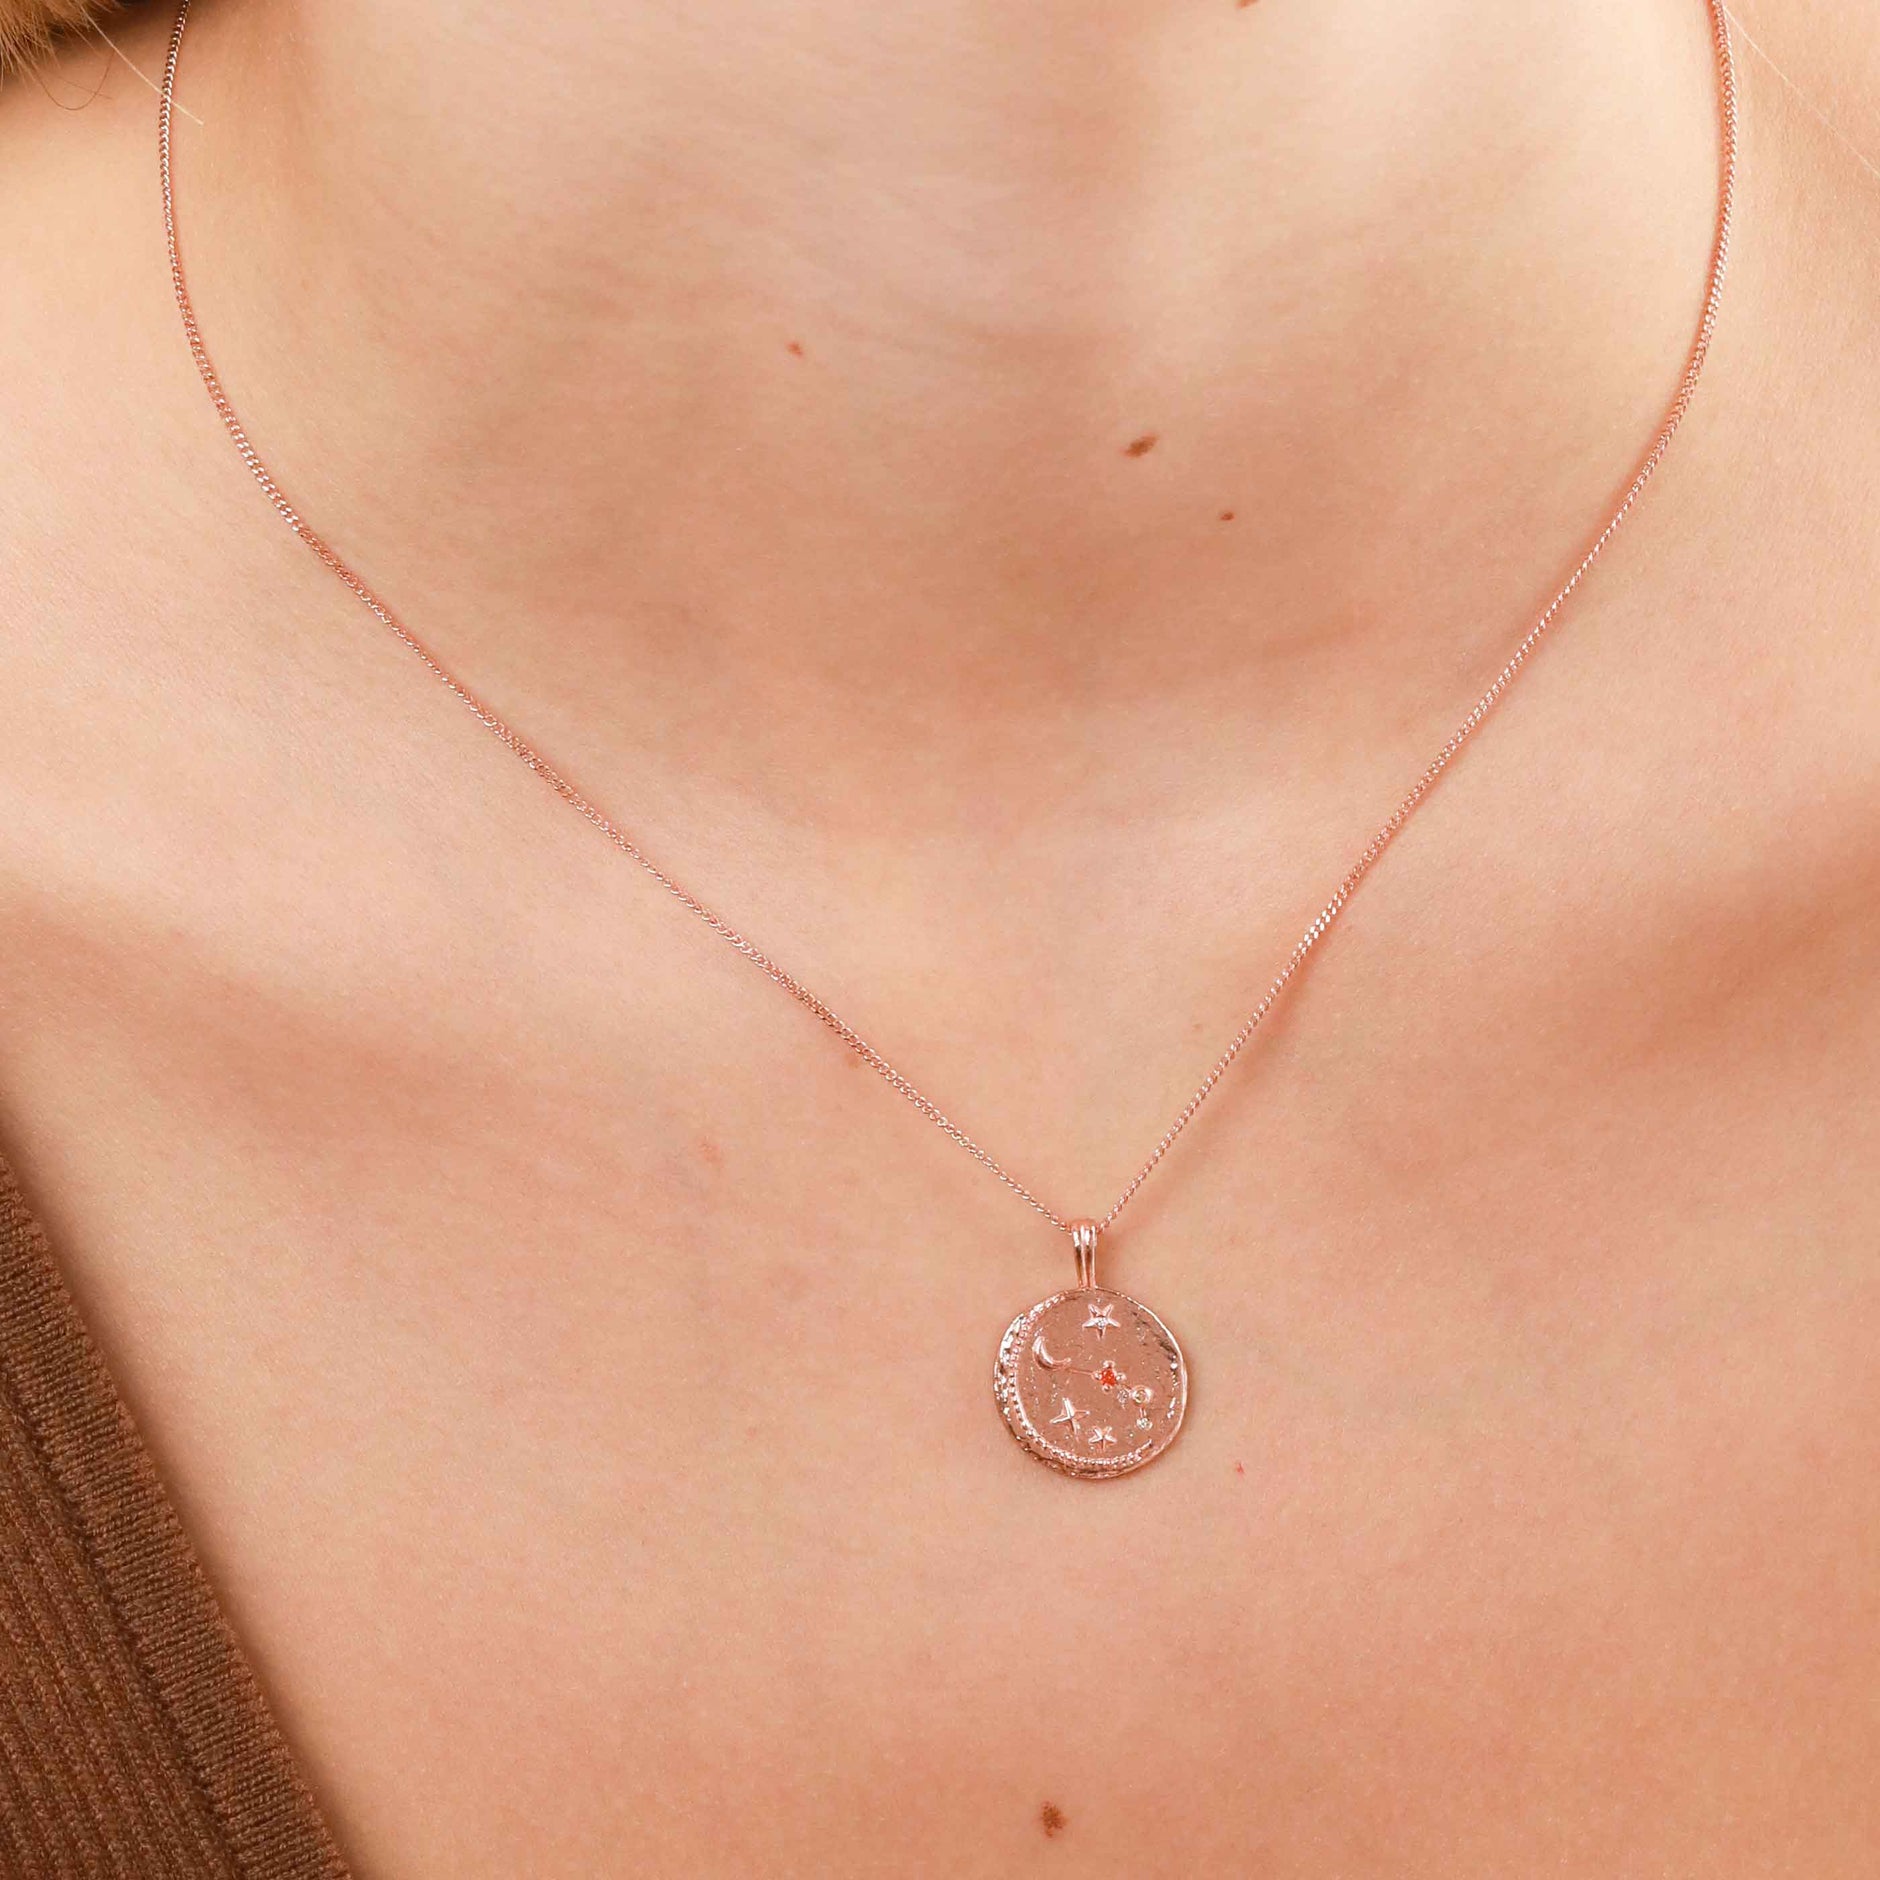 Aries Zodiac Pendant Necklace in Rose Gold